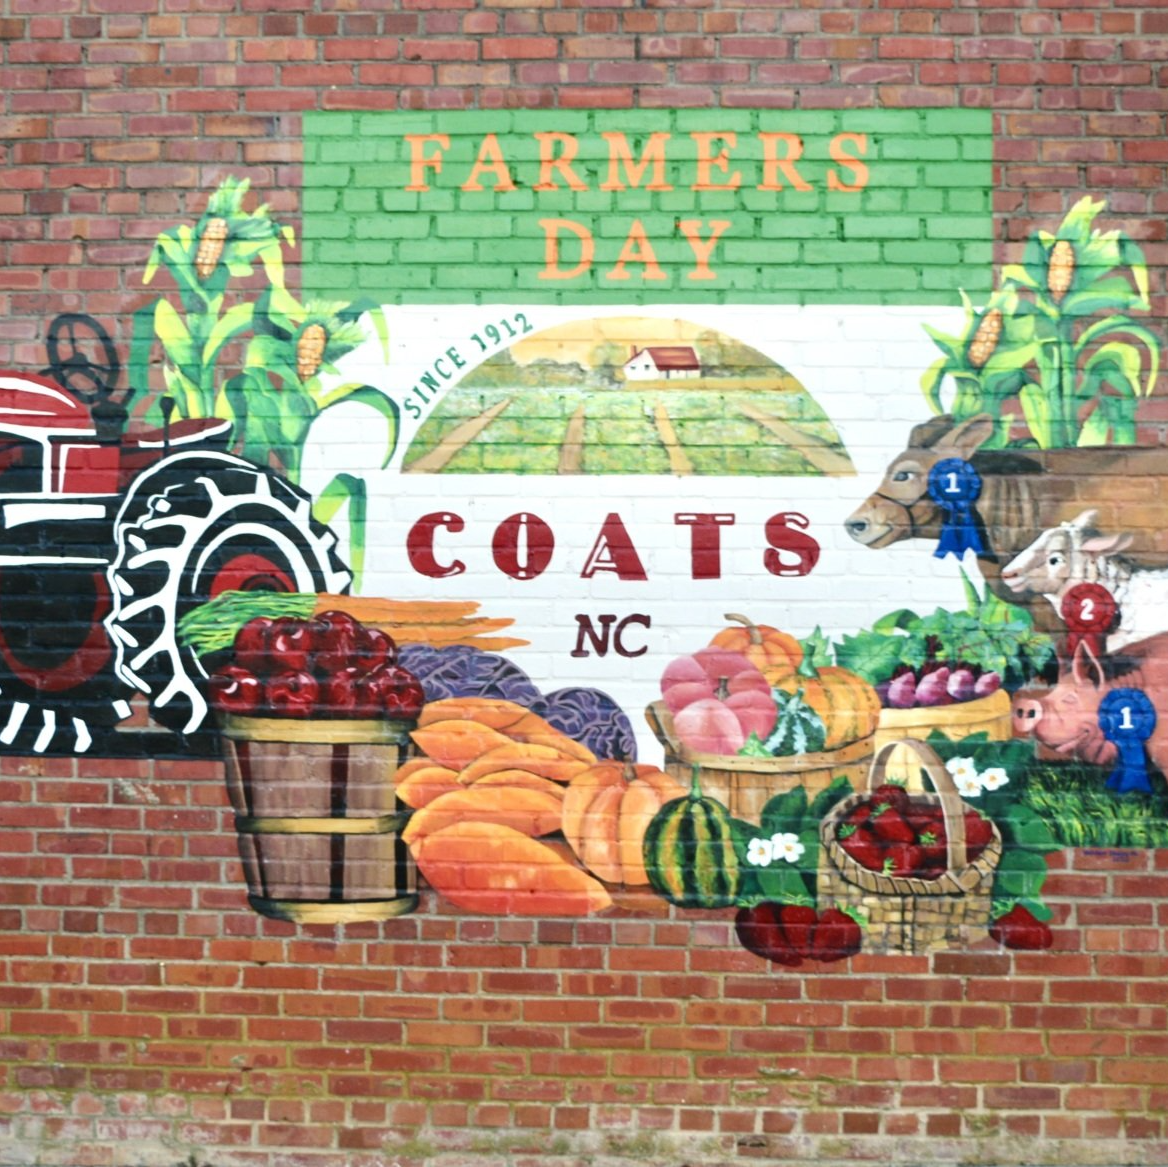 Farmers Day mural in downtown Coats, North Carolina